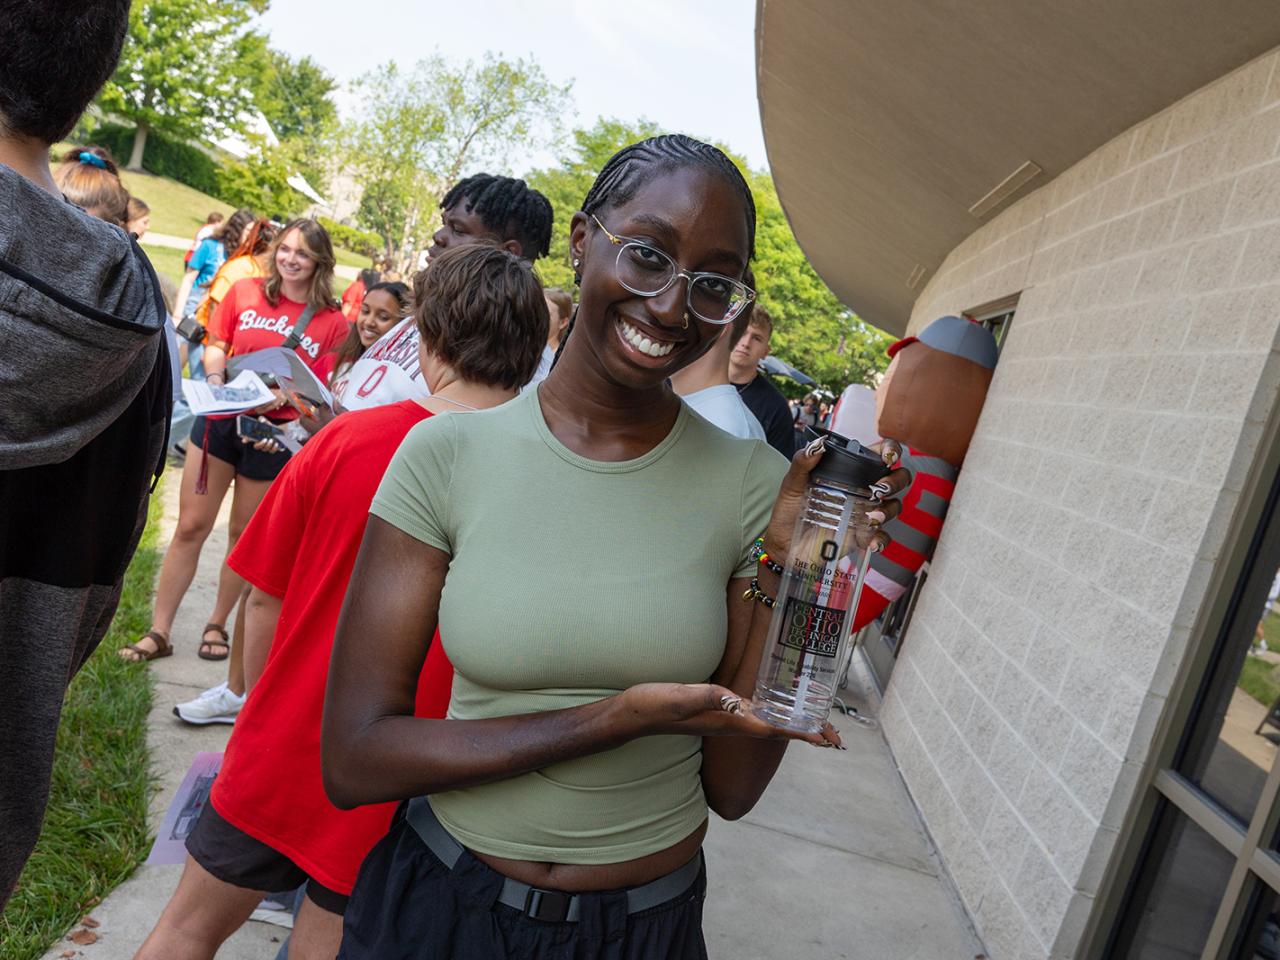 A female student smiles for the camera among a crowd of students during the post-Convocation lunch on the patio of the Warner Center.